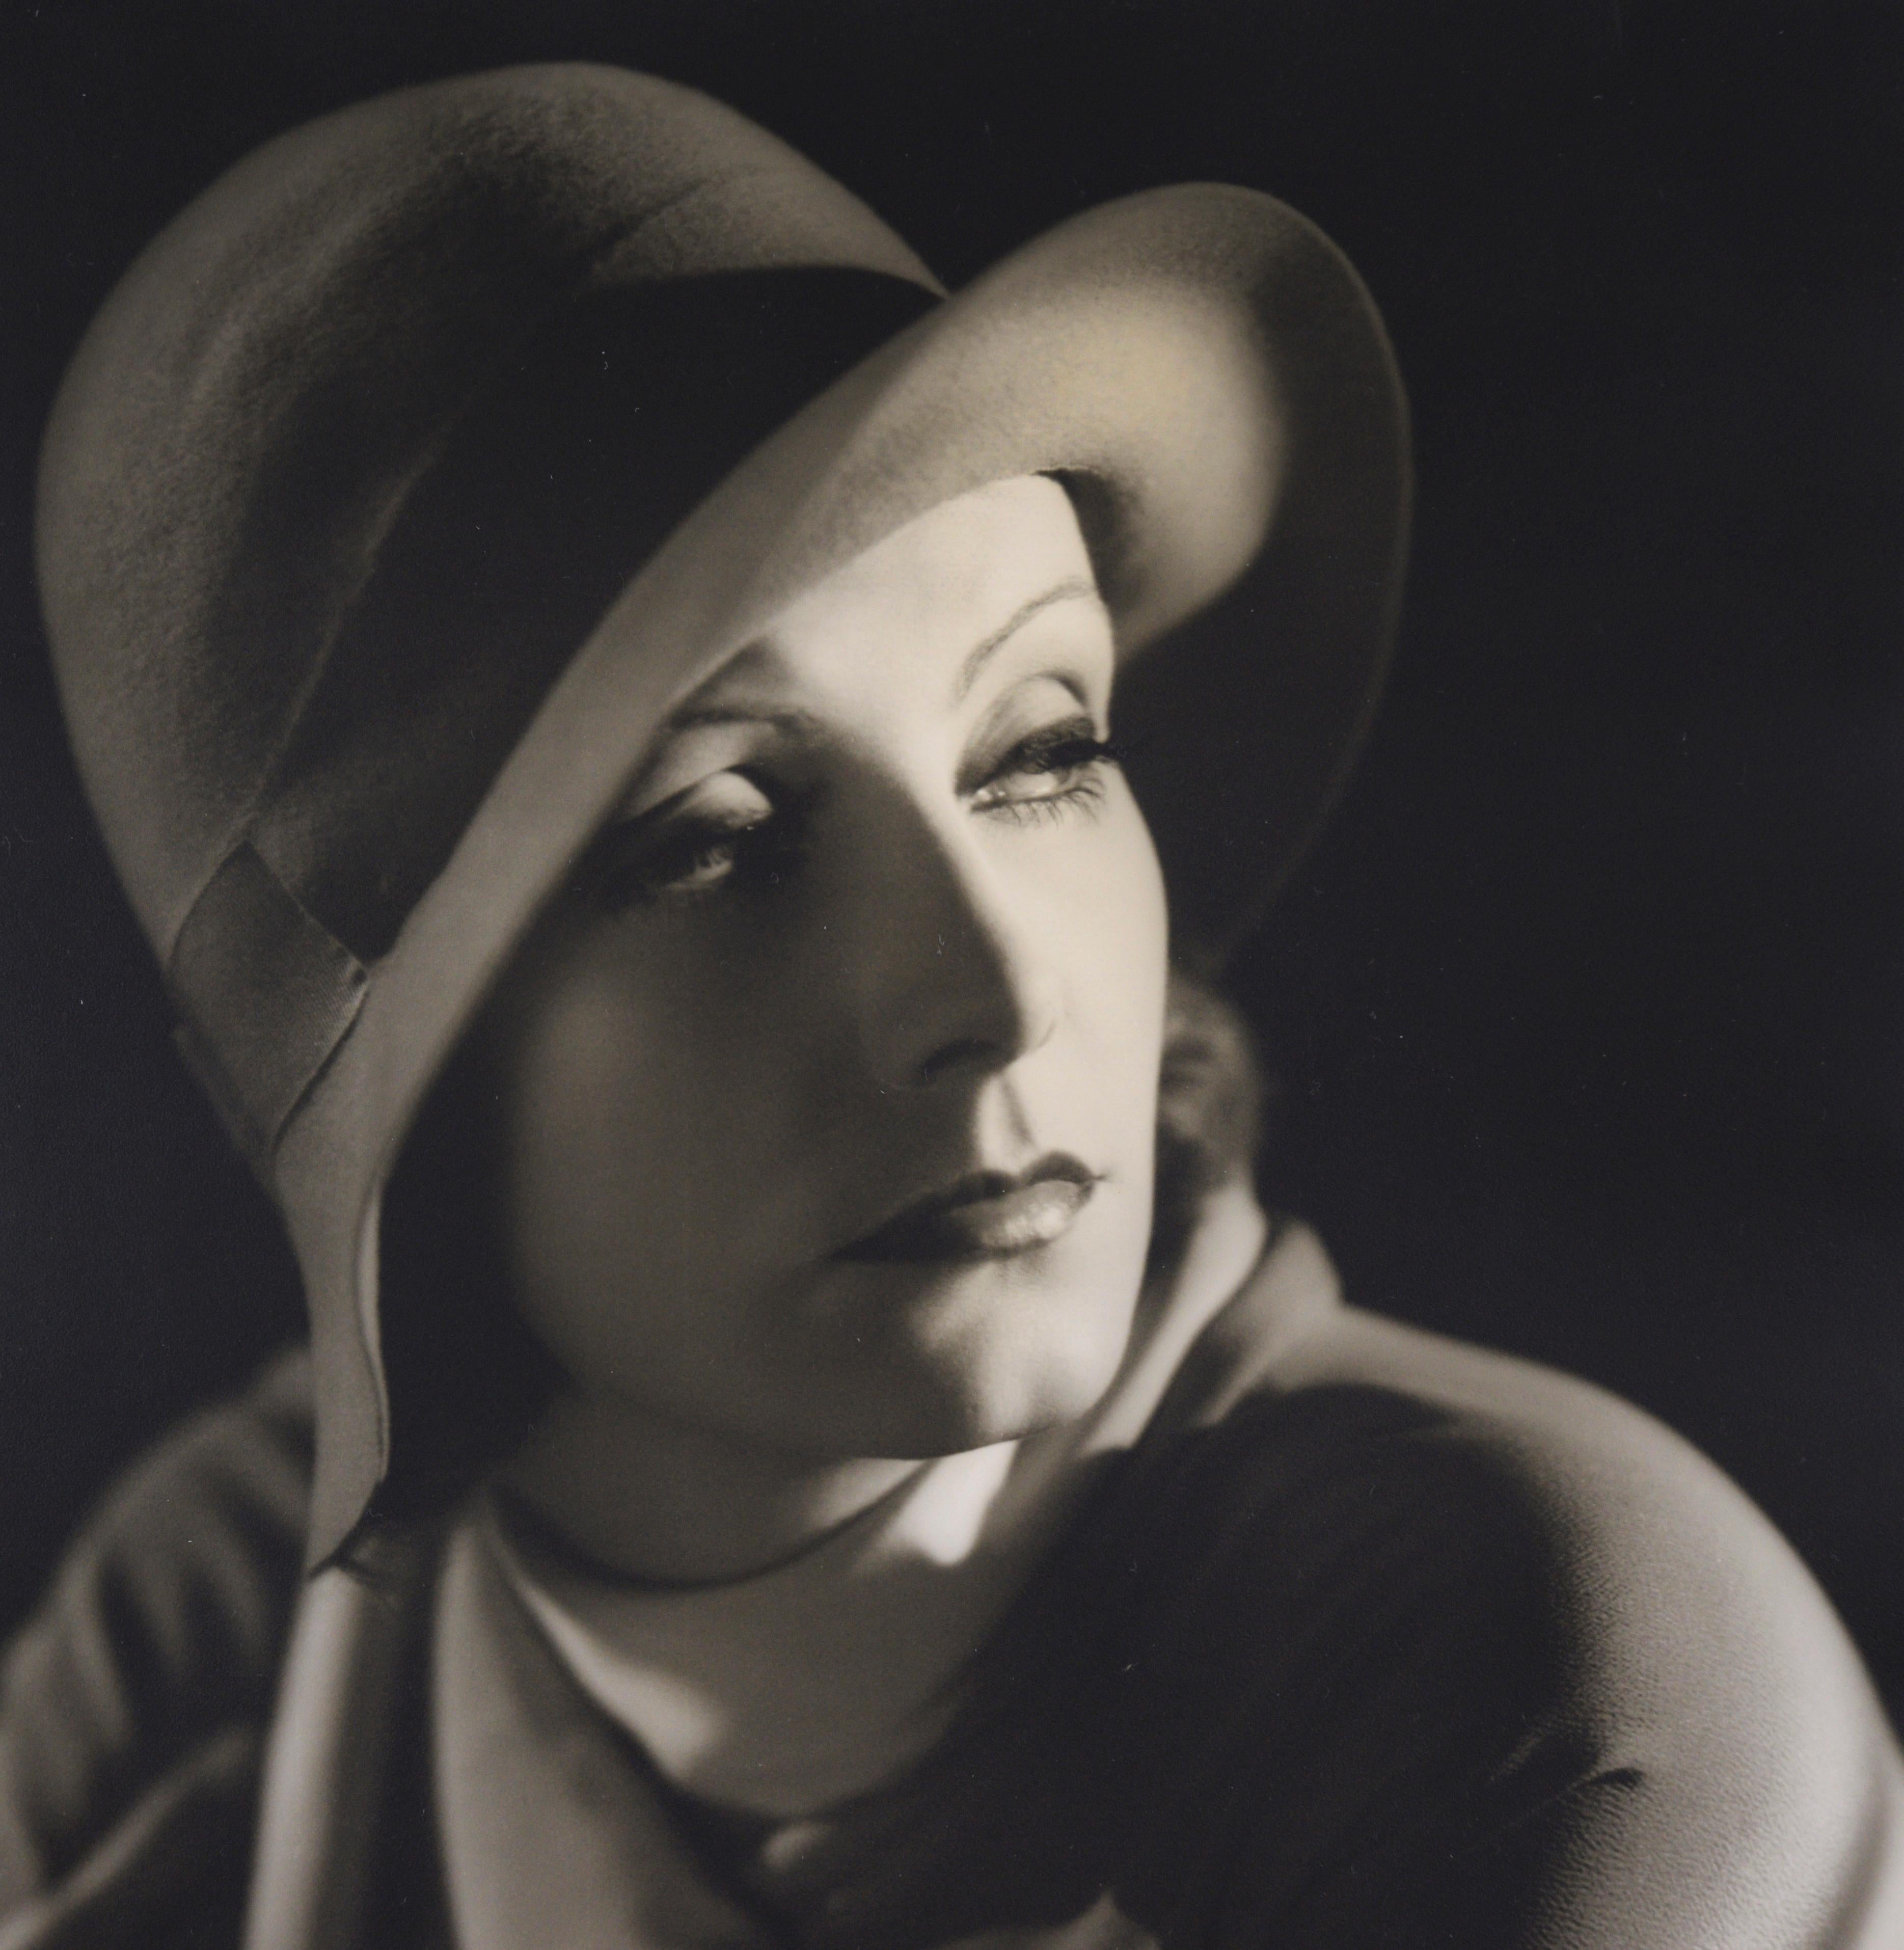 Greta Garbo - Black and White Photograph by Clarence Sinclair Bull, 1930 For Sale 4